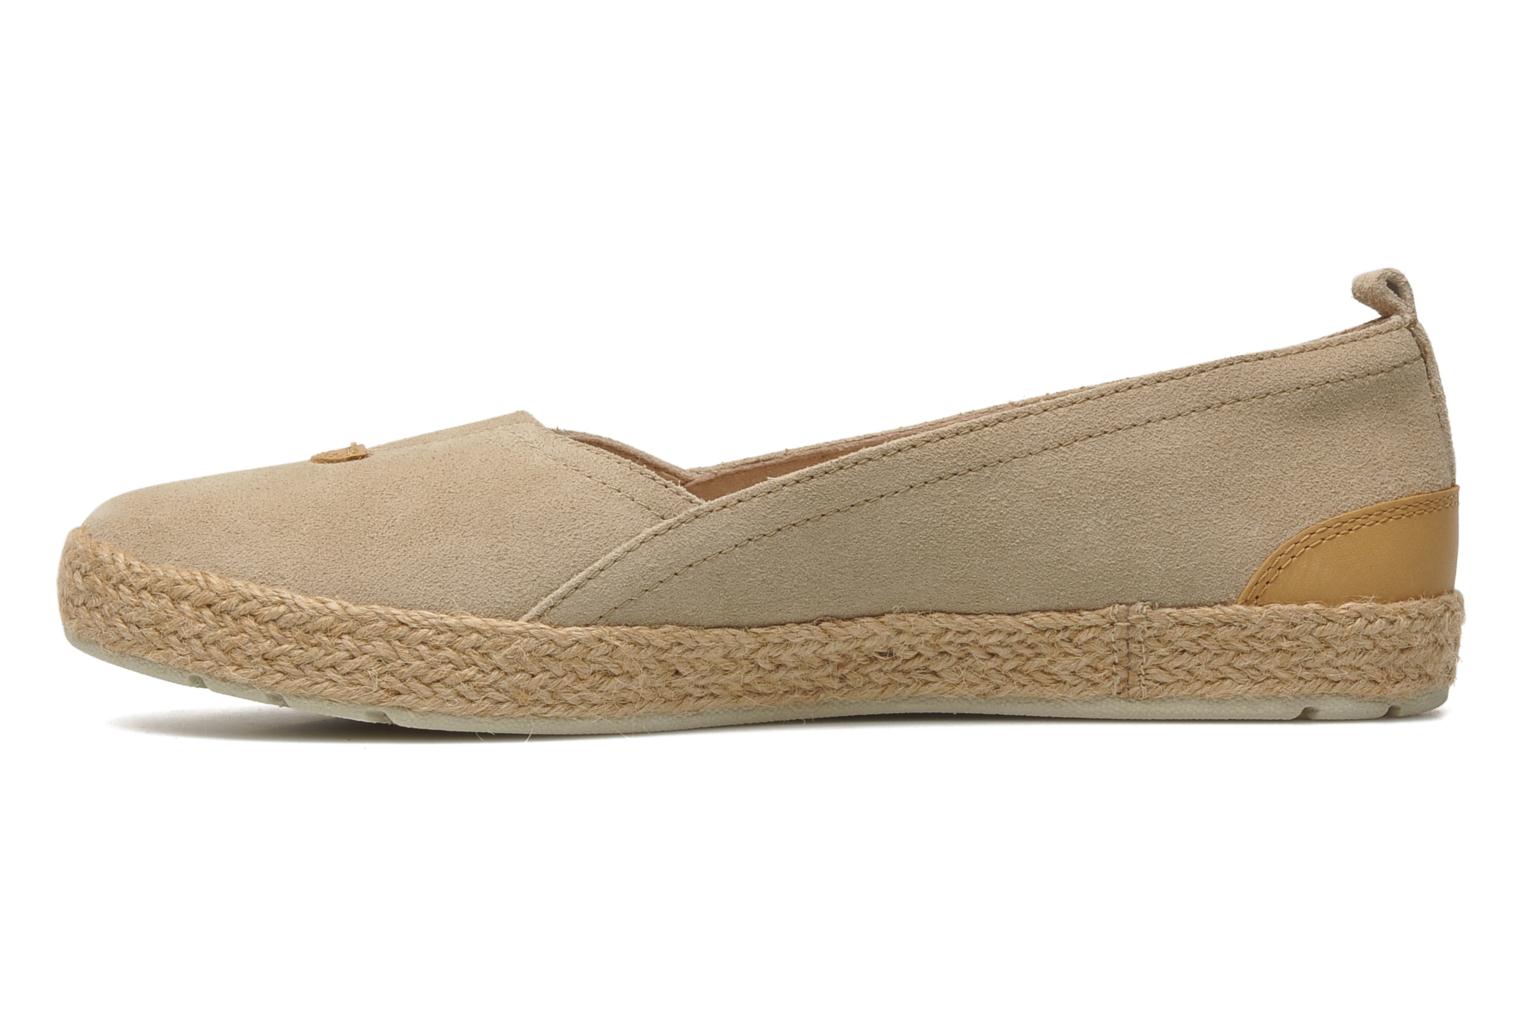 Timberland Earthkeepers Casco Bay Slip On with Jute Rand Ballet pumps ...